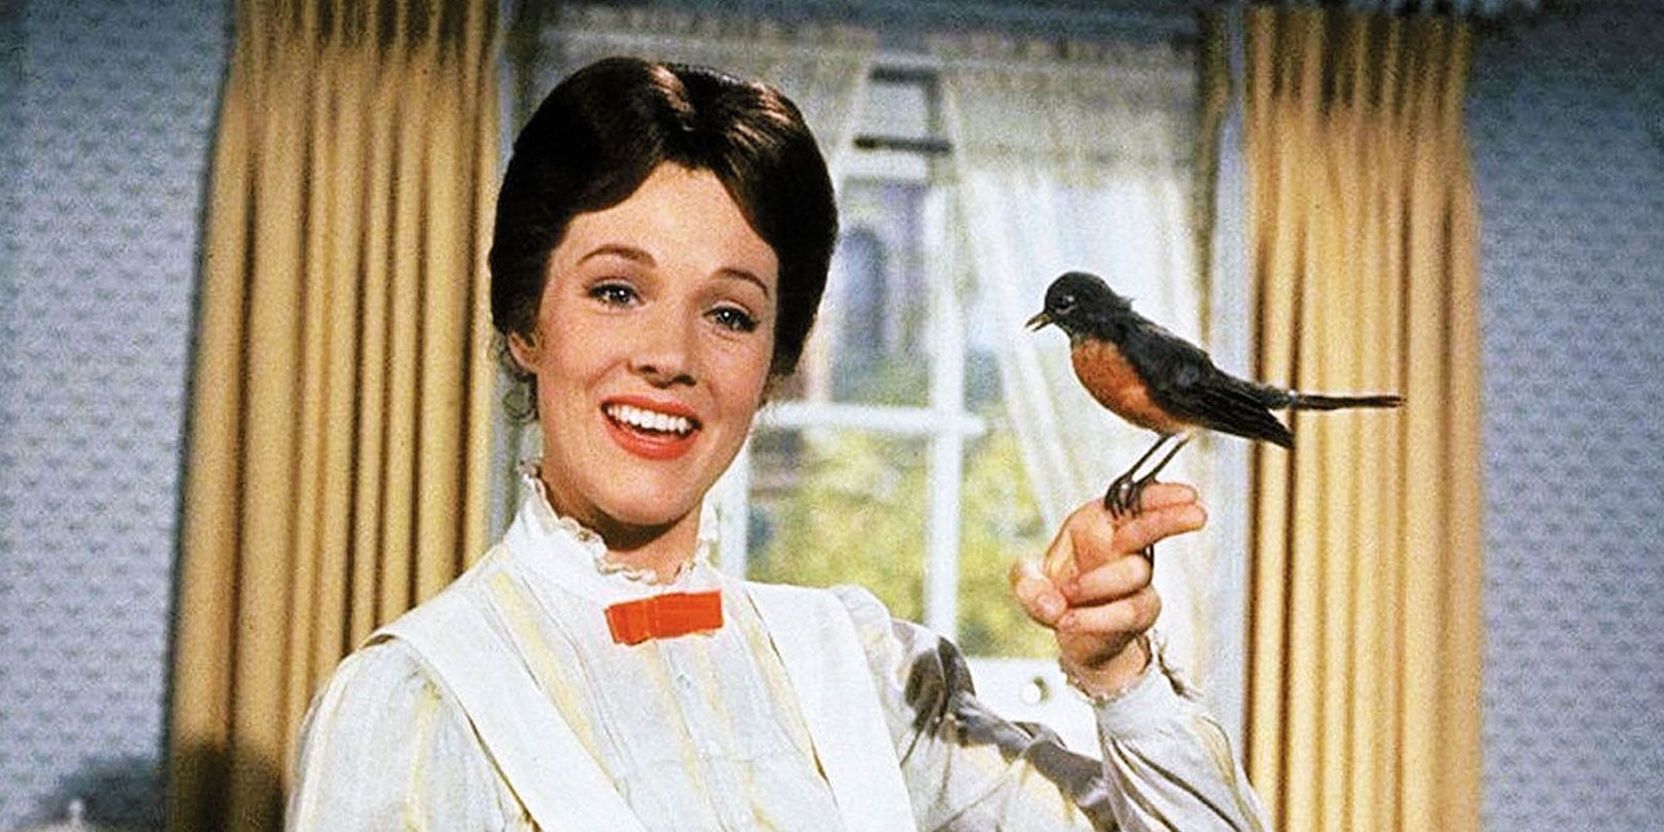 Mary Poppins (Julie Andrews) singing in the Disney movie &quot;Mary Poppins.&quot;